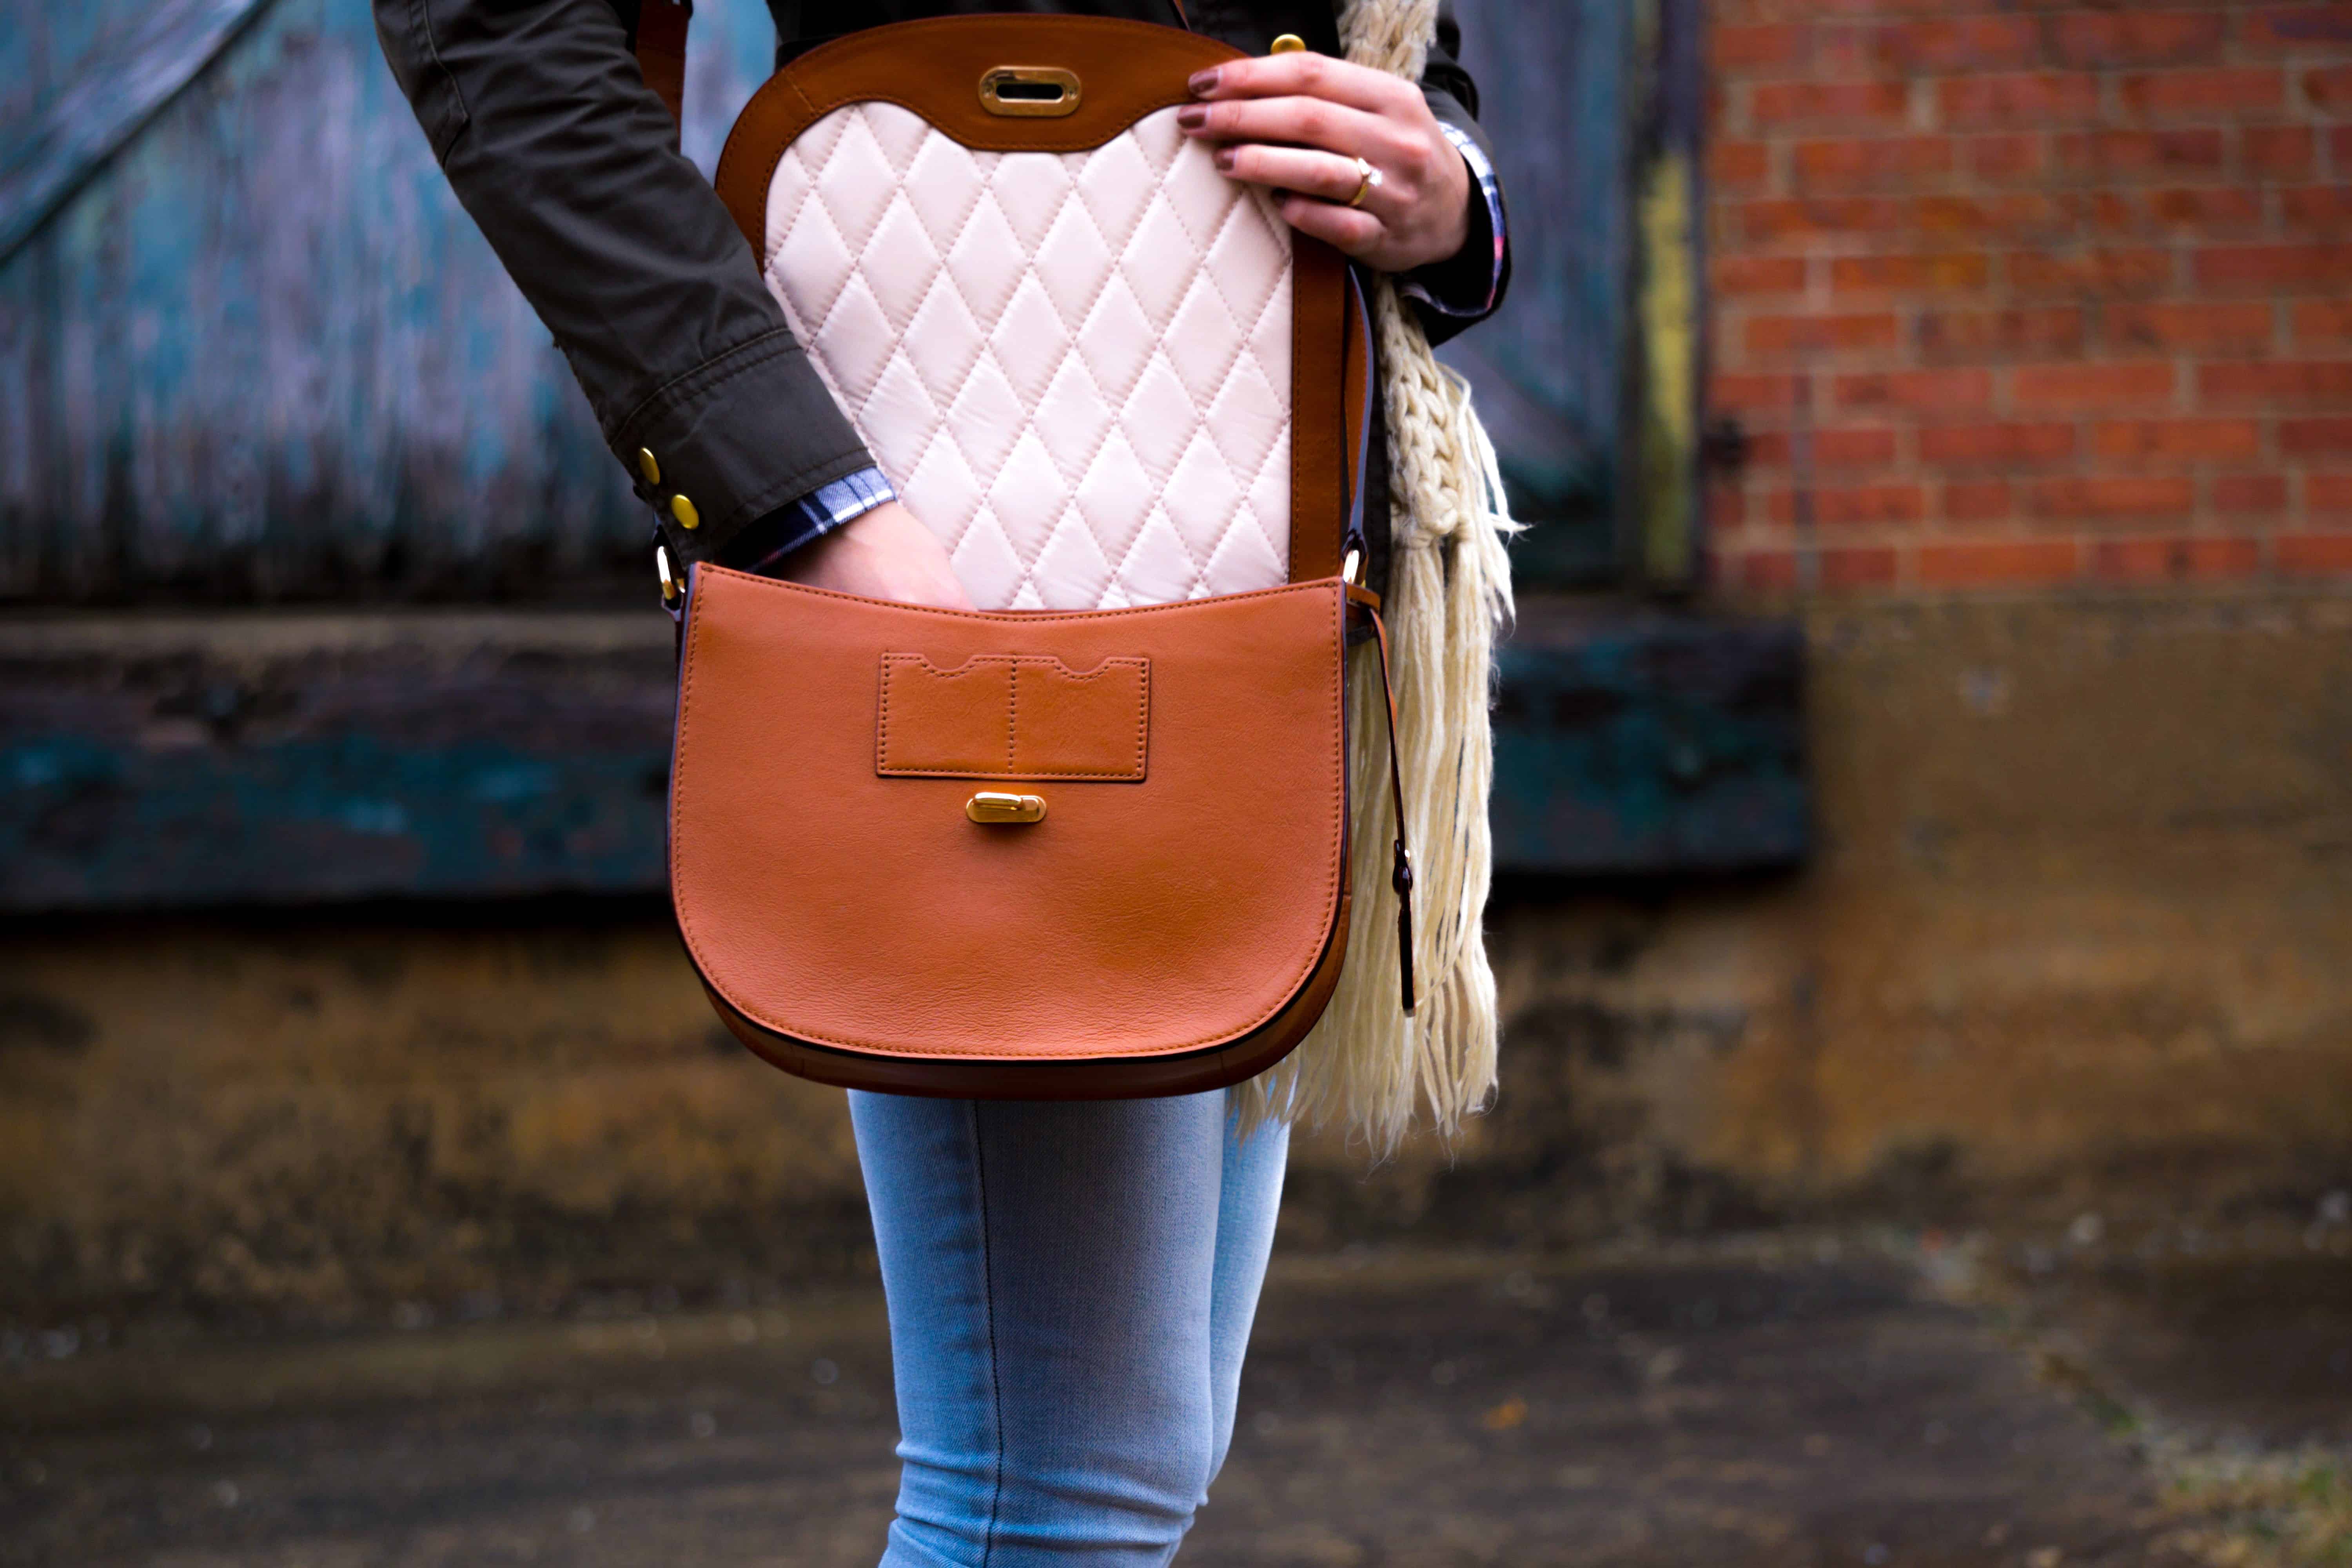 A lady holding a leather bag